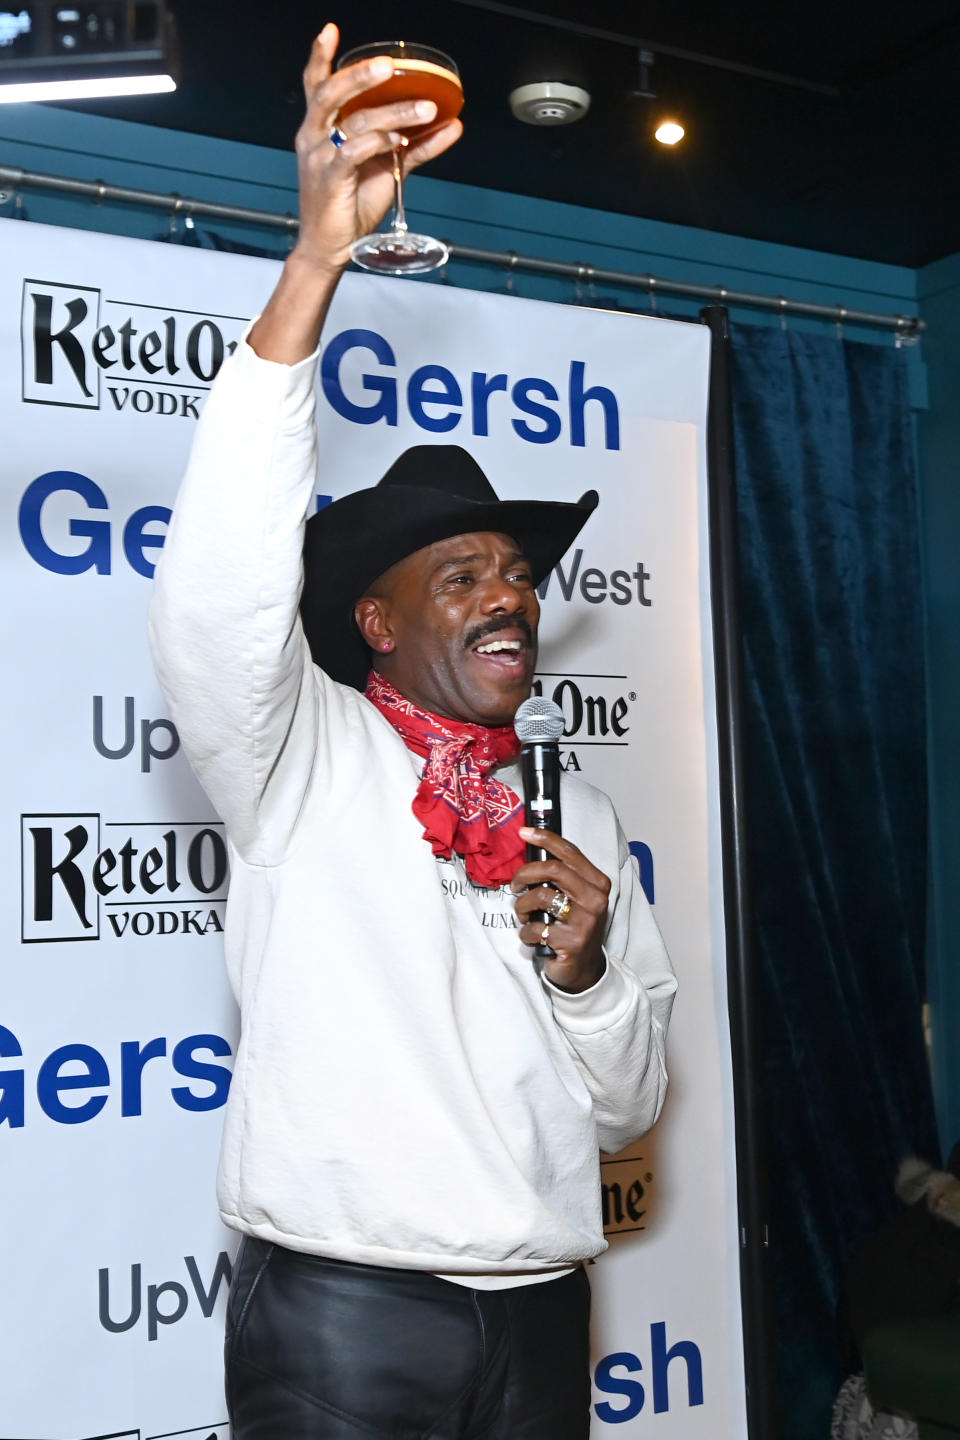 Colman Domingo at Gersh’s Sundance party in January (Araya Doheny/Getty Images)